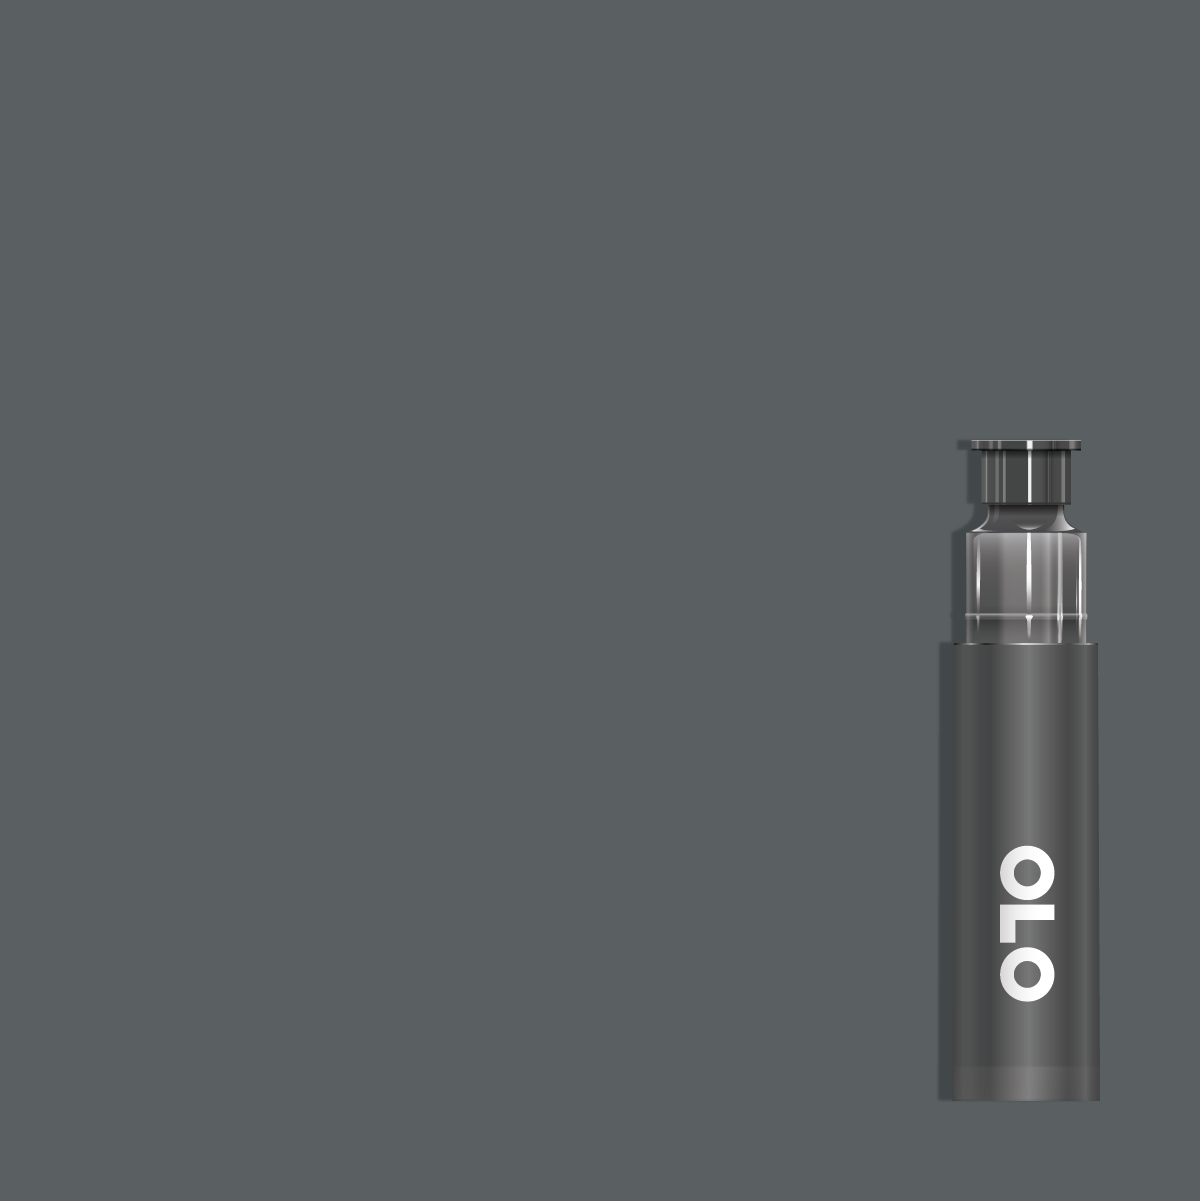 OLO CG5 Cool Gray 5 Replacement Cartridge